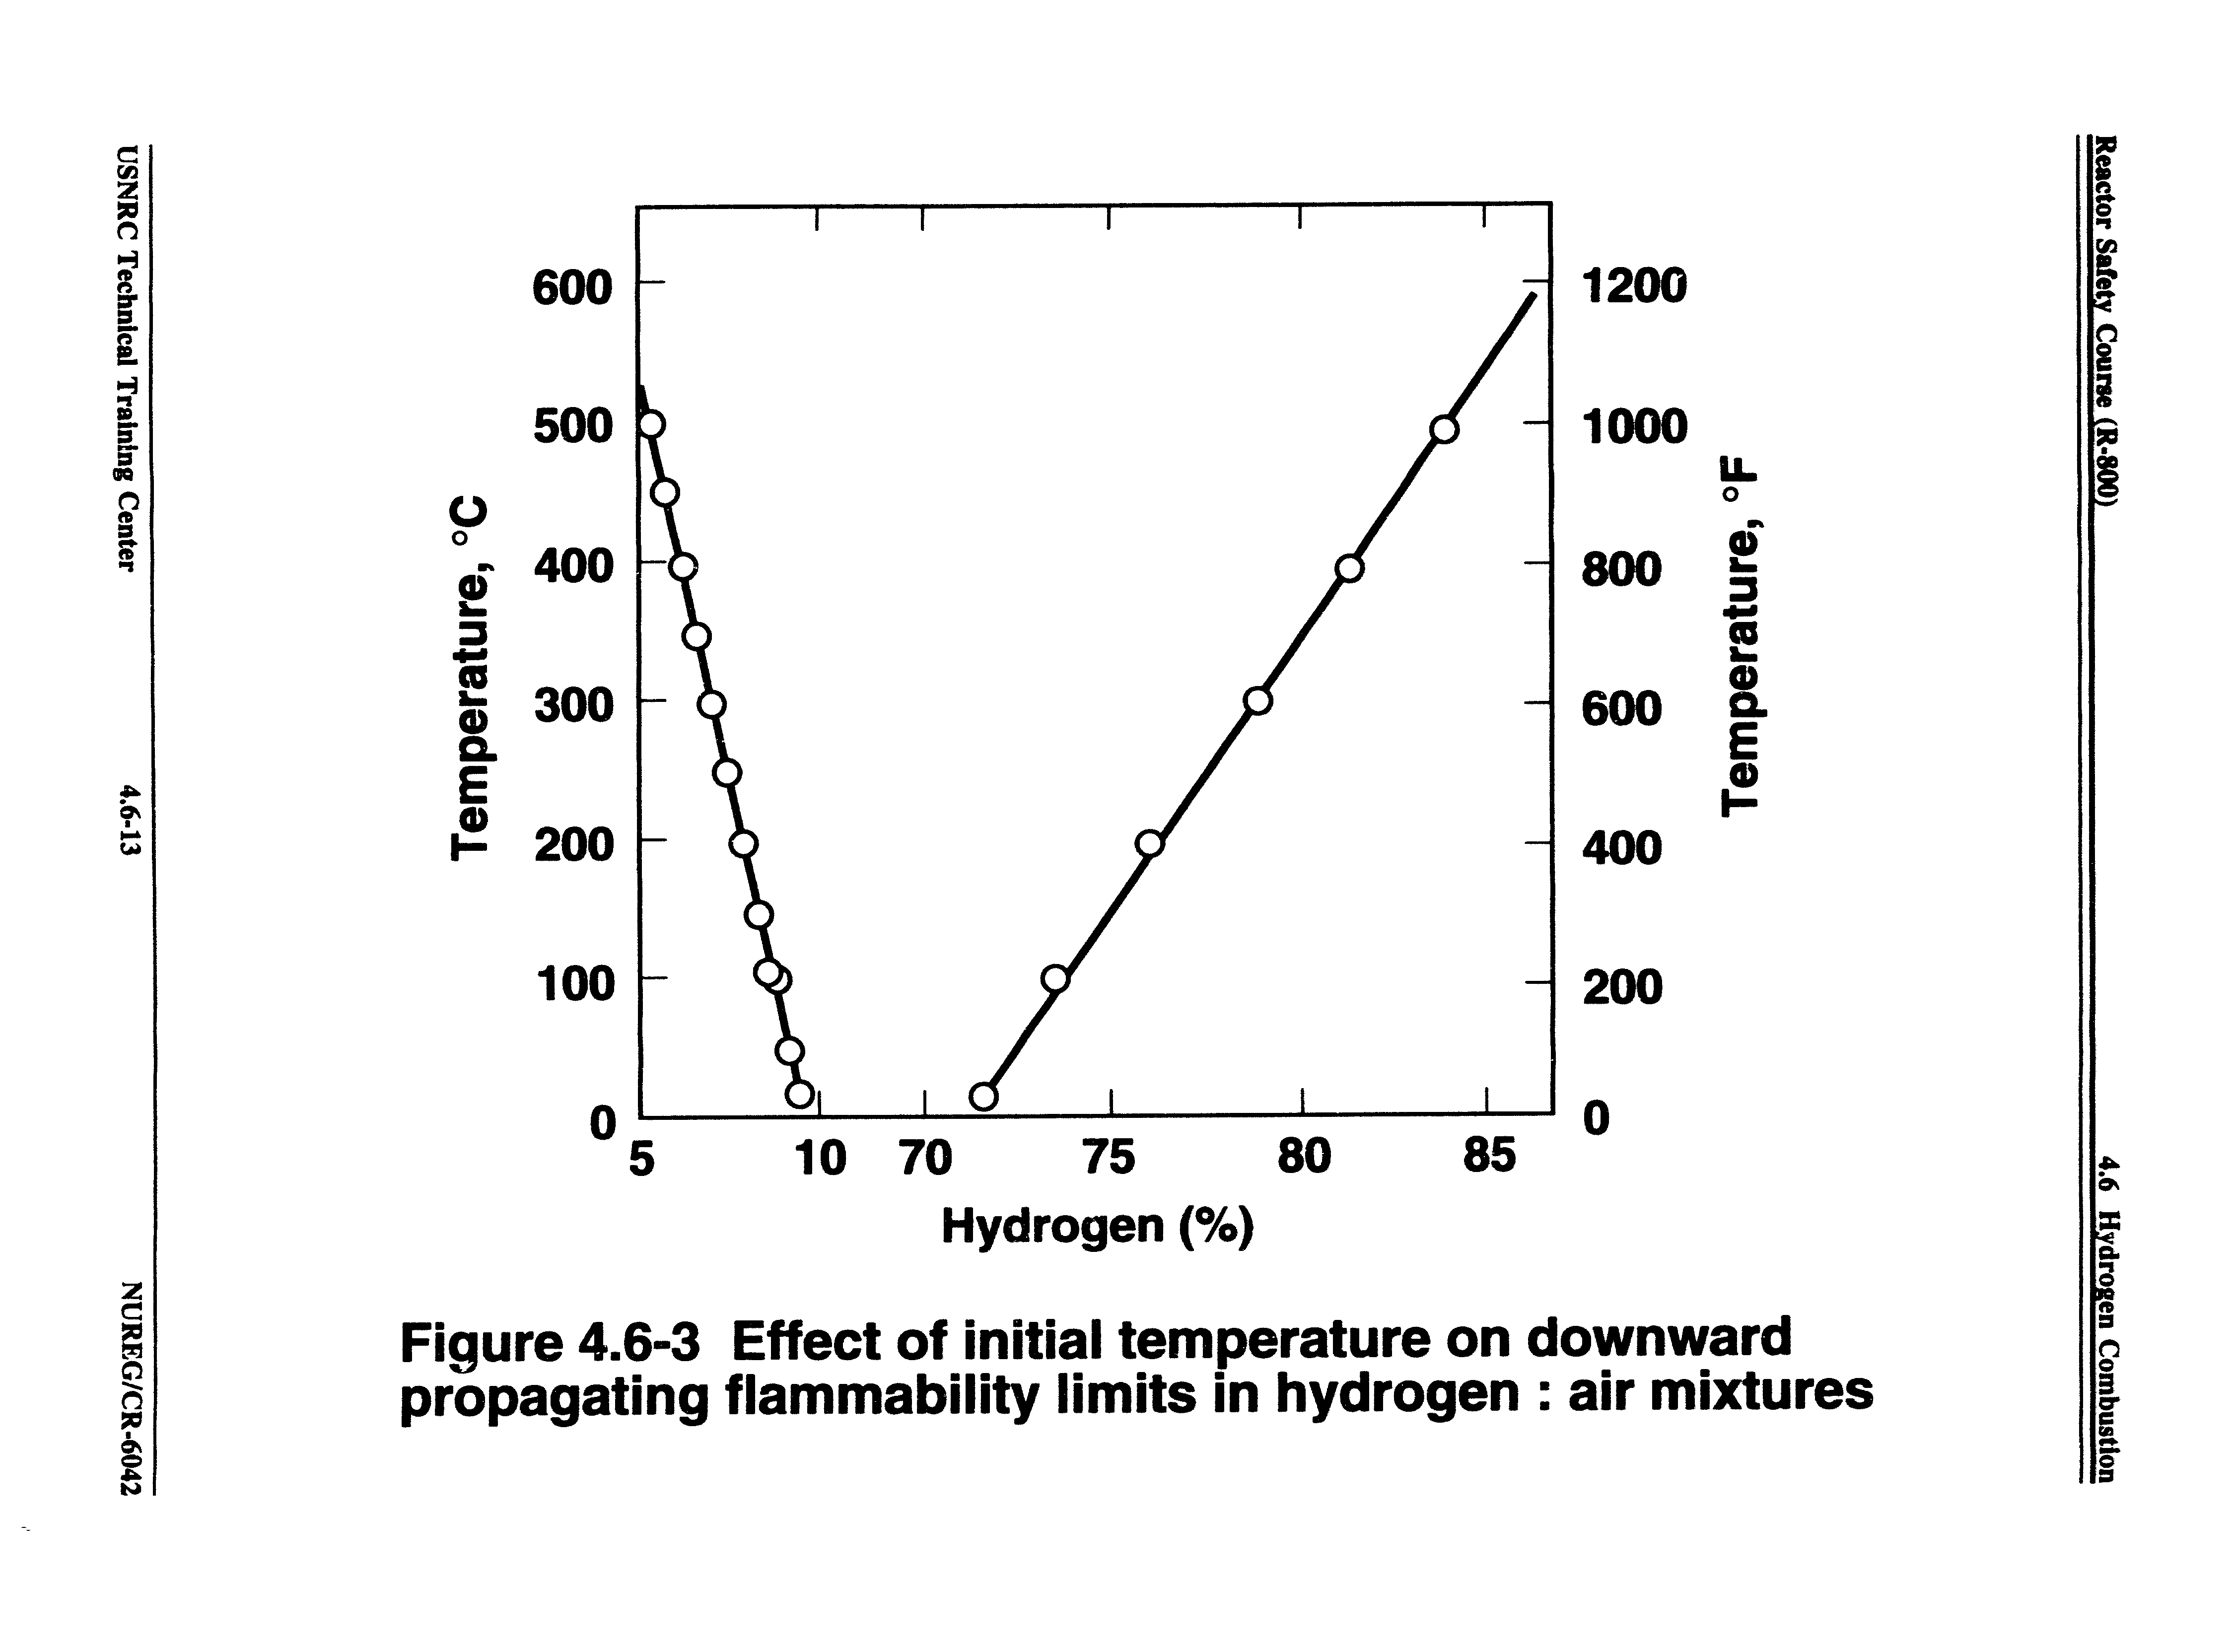 Figure 4.6-3 Effect of initial temperature on downward propagating flammability limits in hydrogen air mixtures...